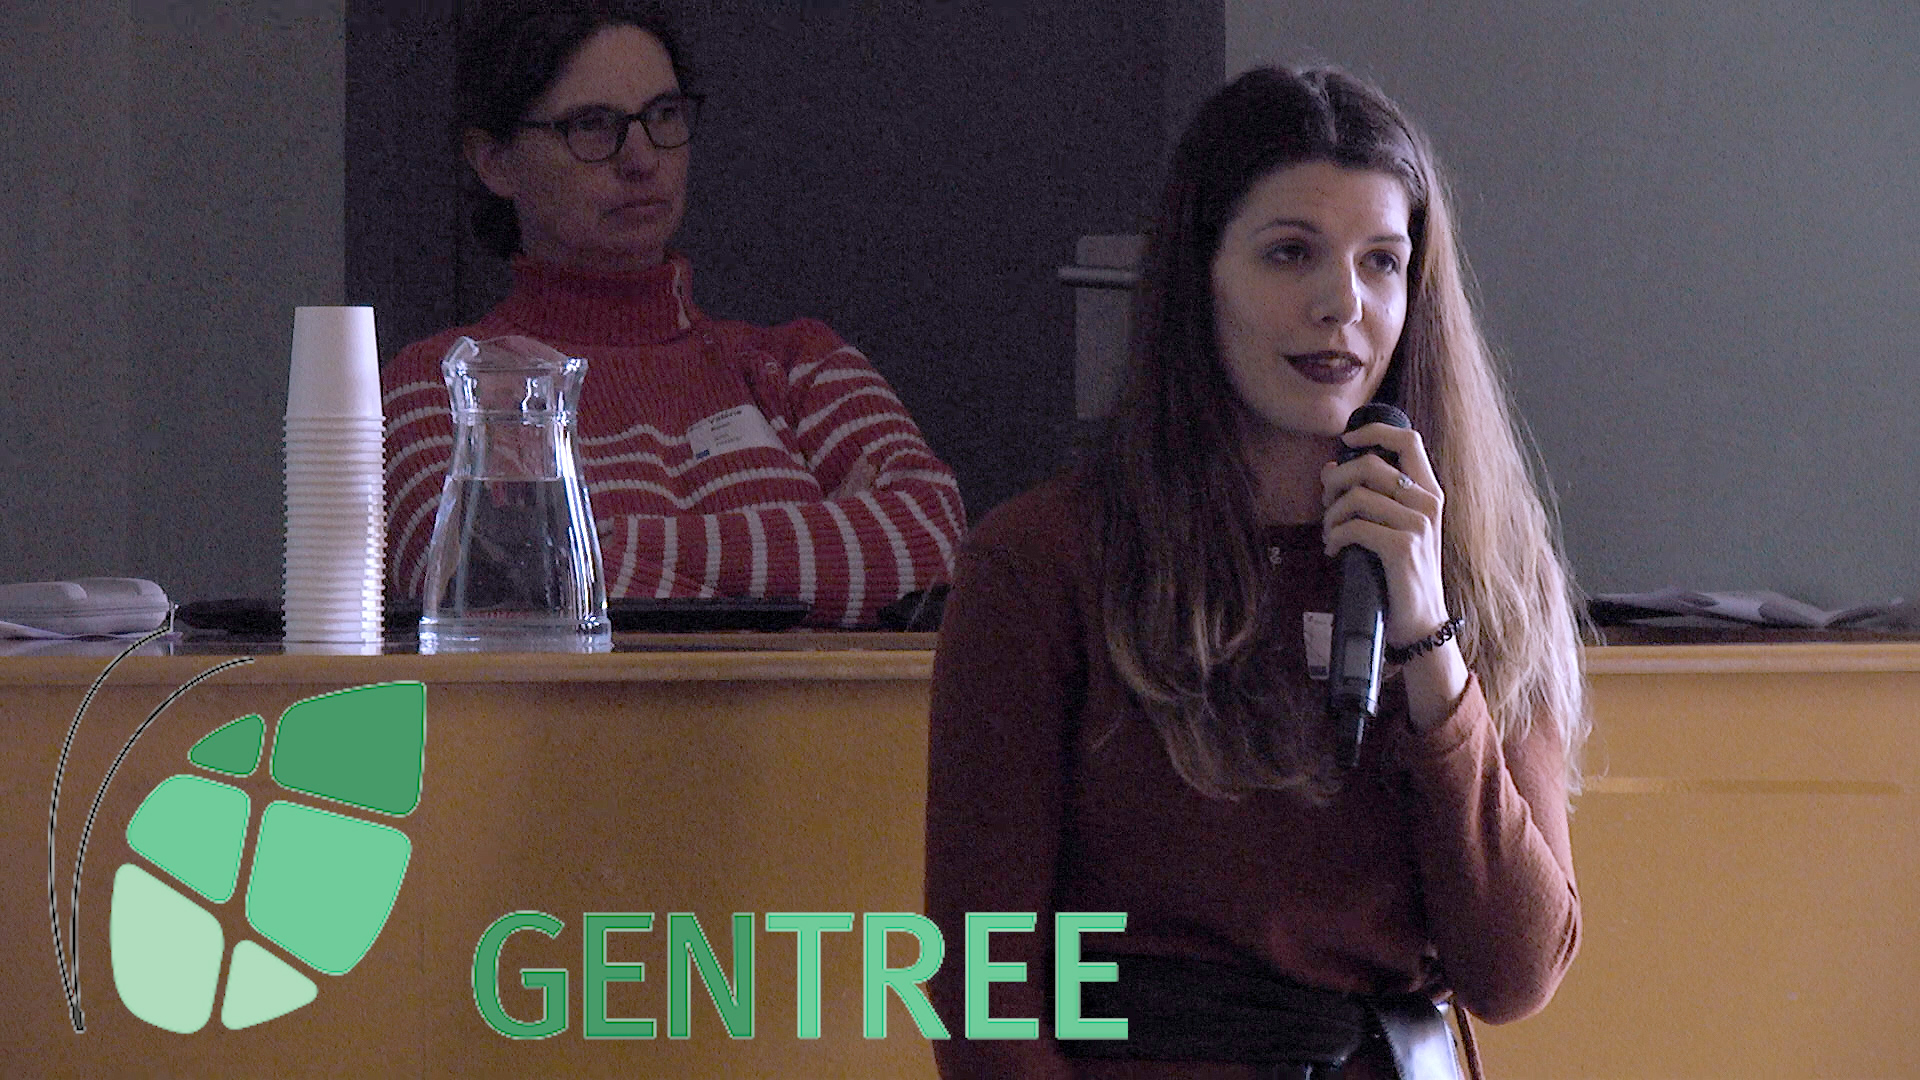 [COLLOQUE] GENTREE Final Conference 27-31 January 2020 séance 25